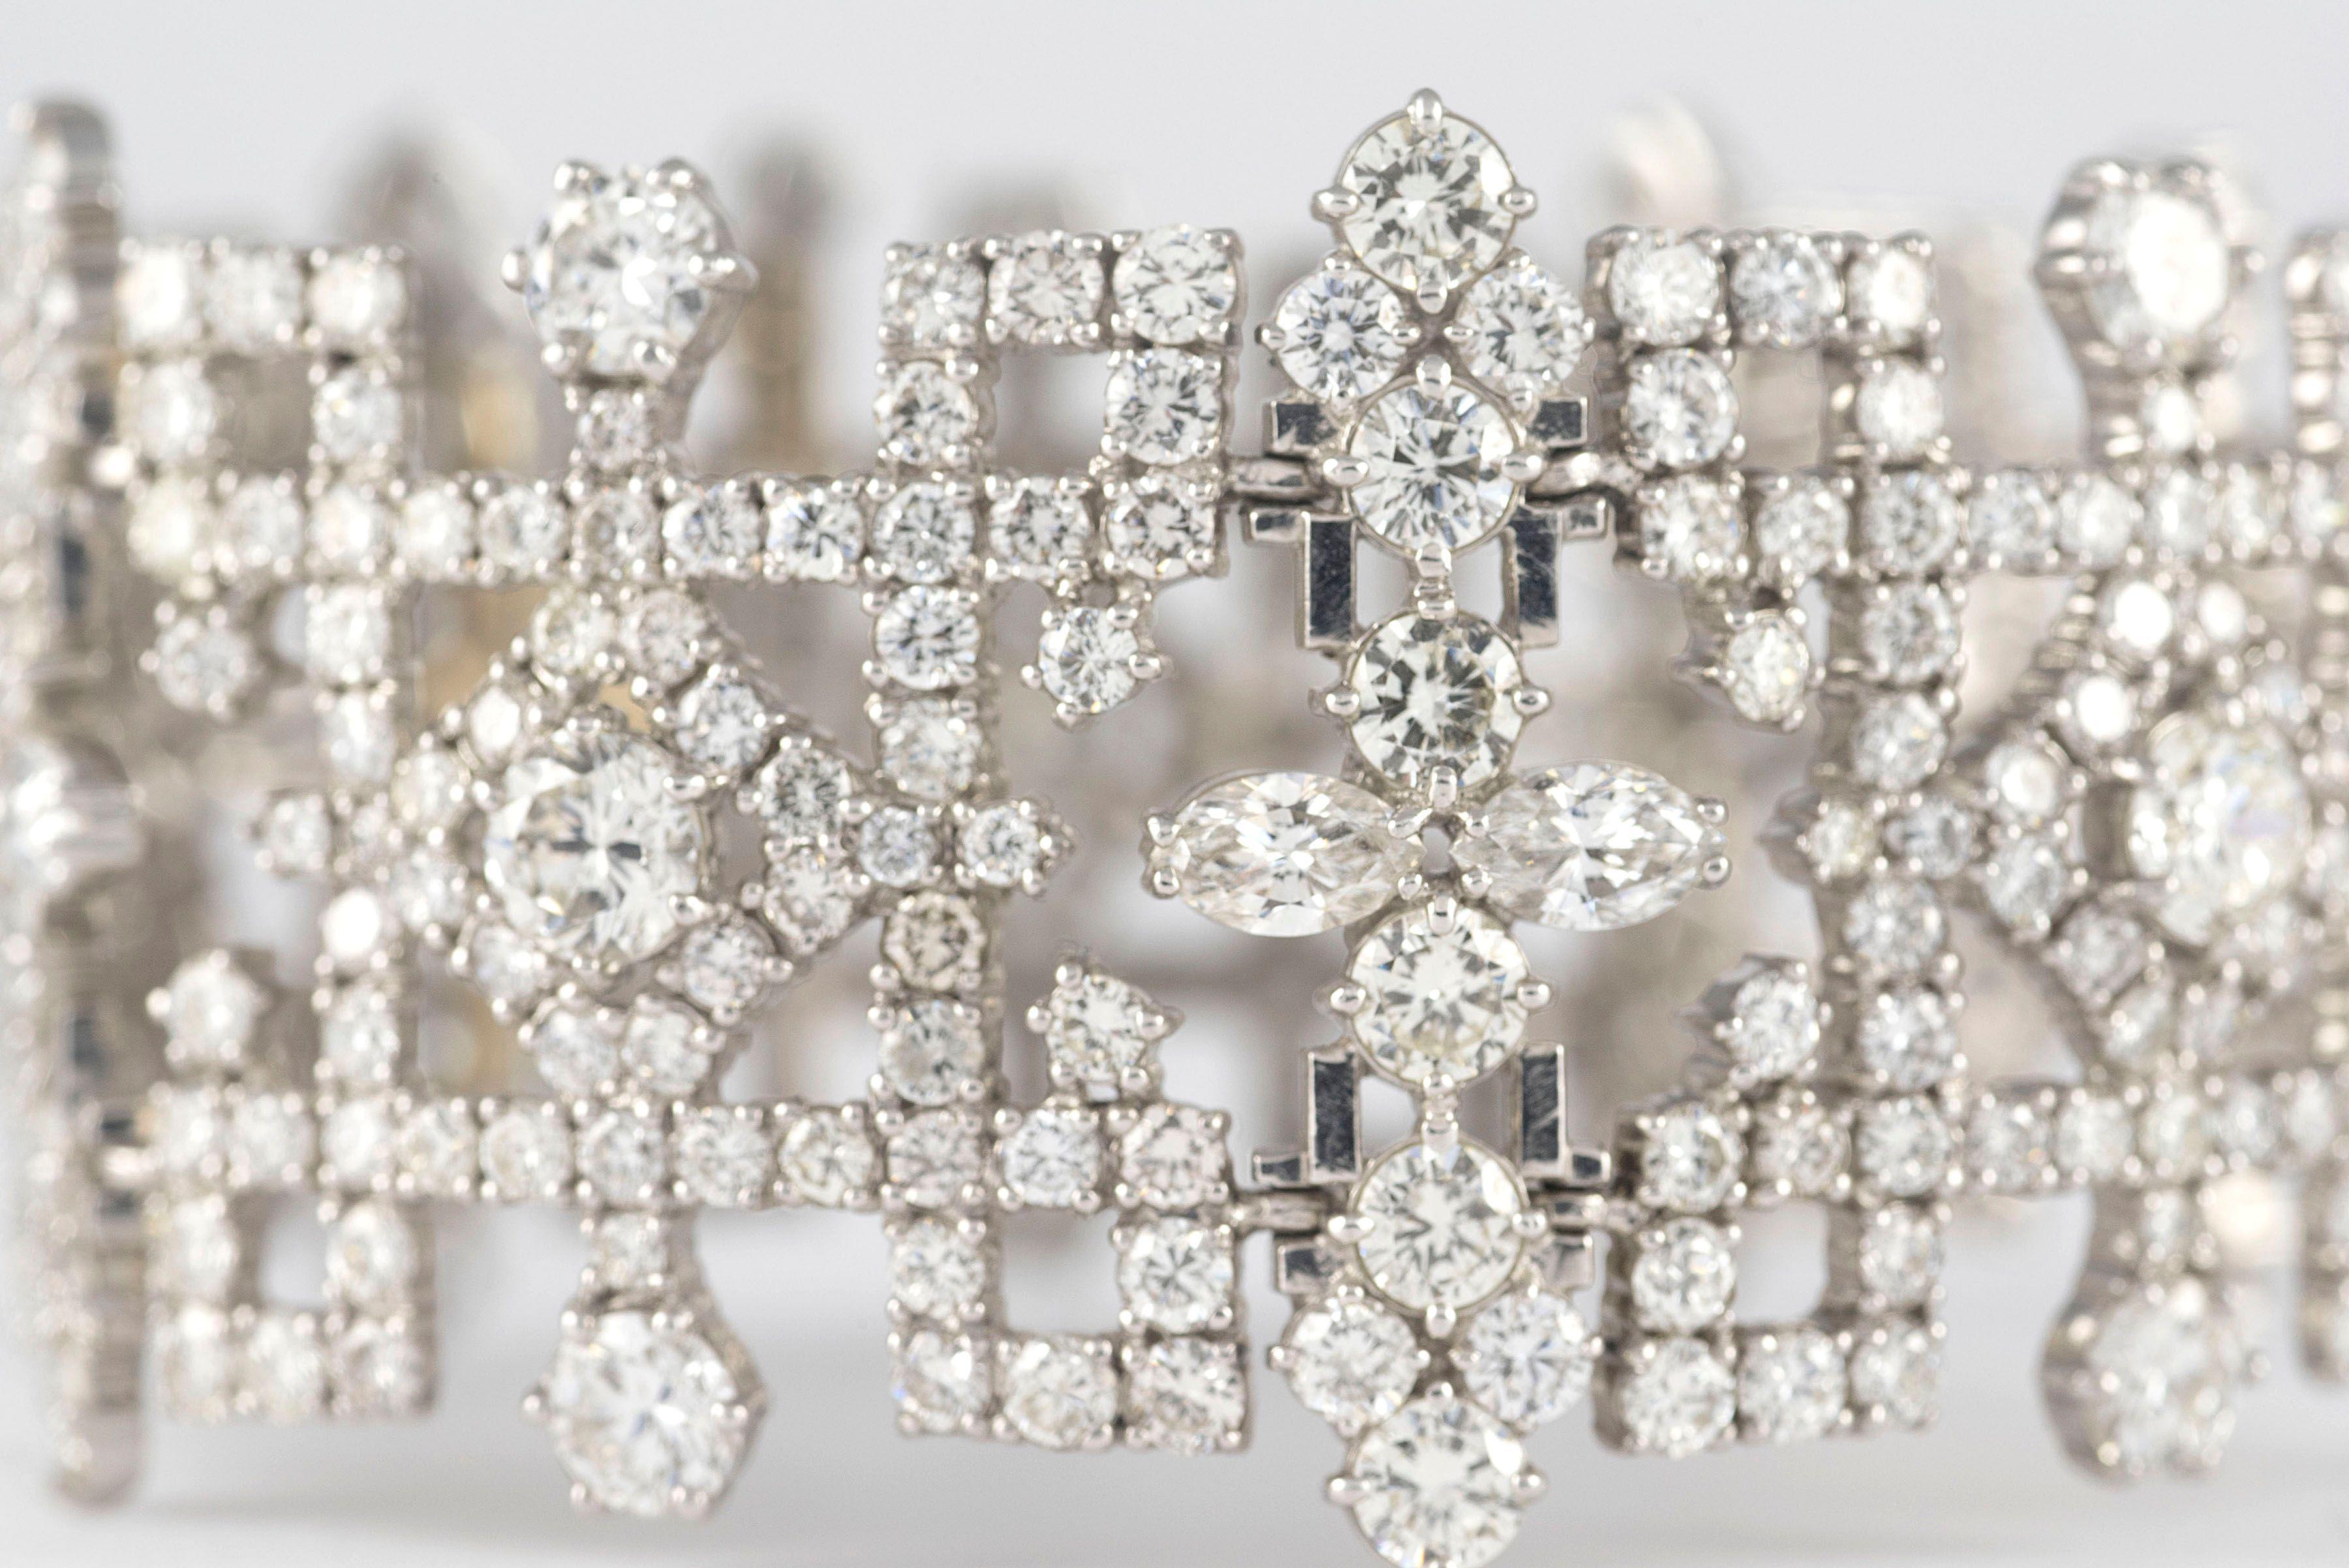 This magnificent Art Deco-style bracelet features approximately 50.0 carats of round and marquise diamonds embellished over alternating geometric links hand crafted in platinum. 
